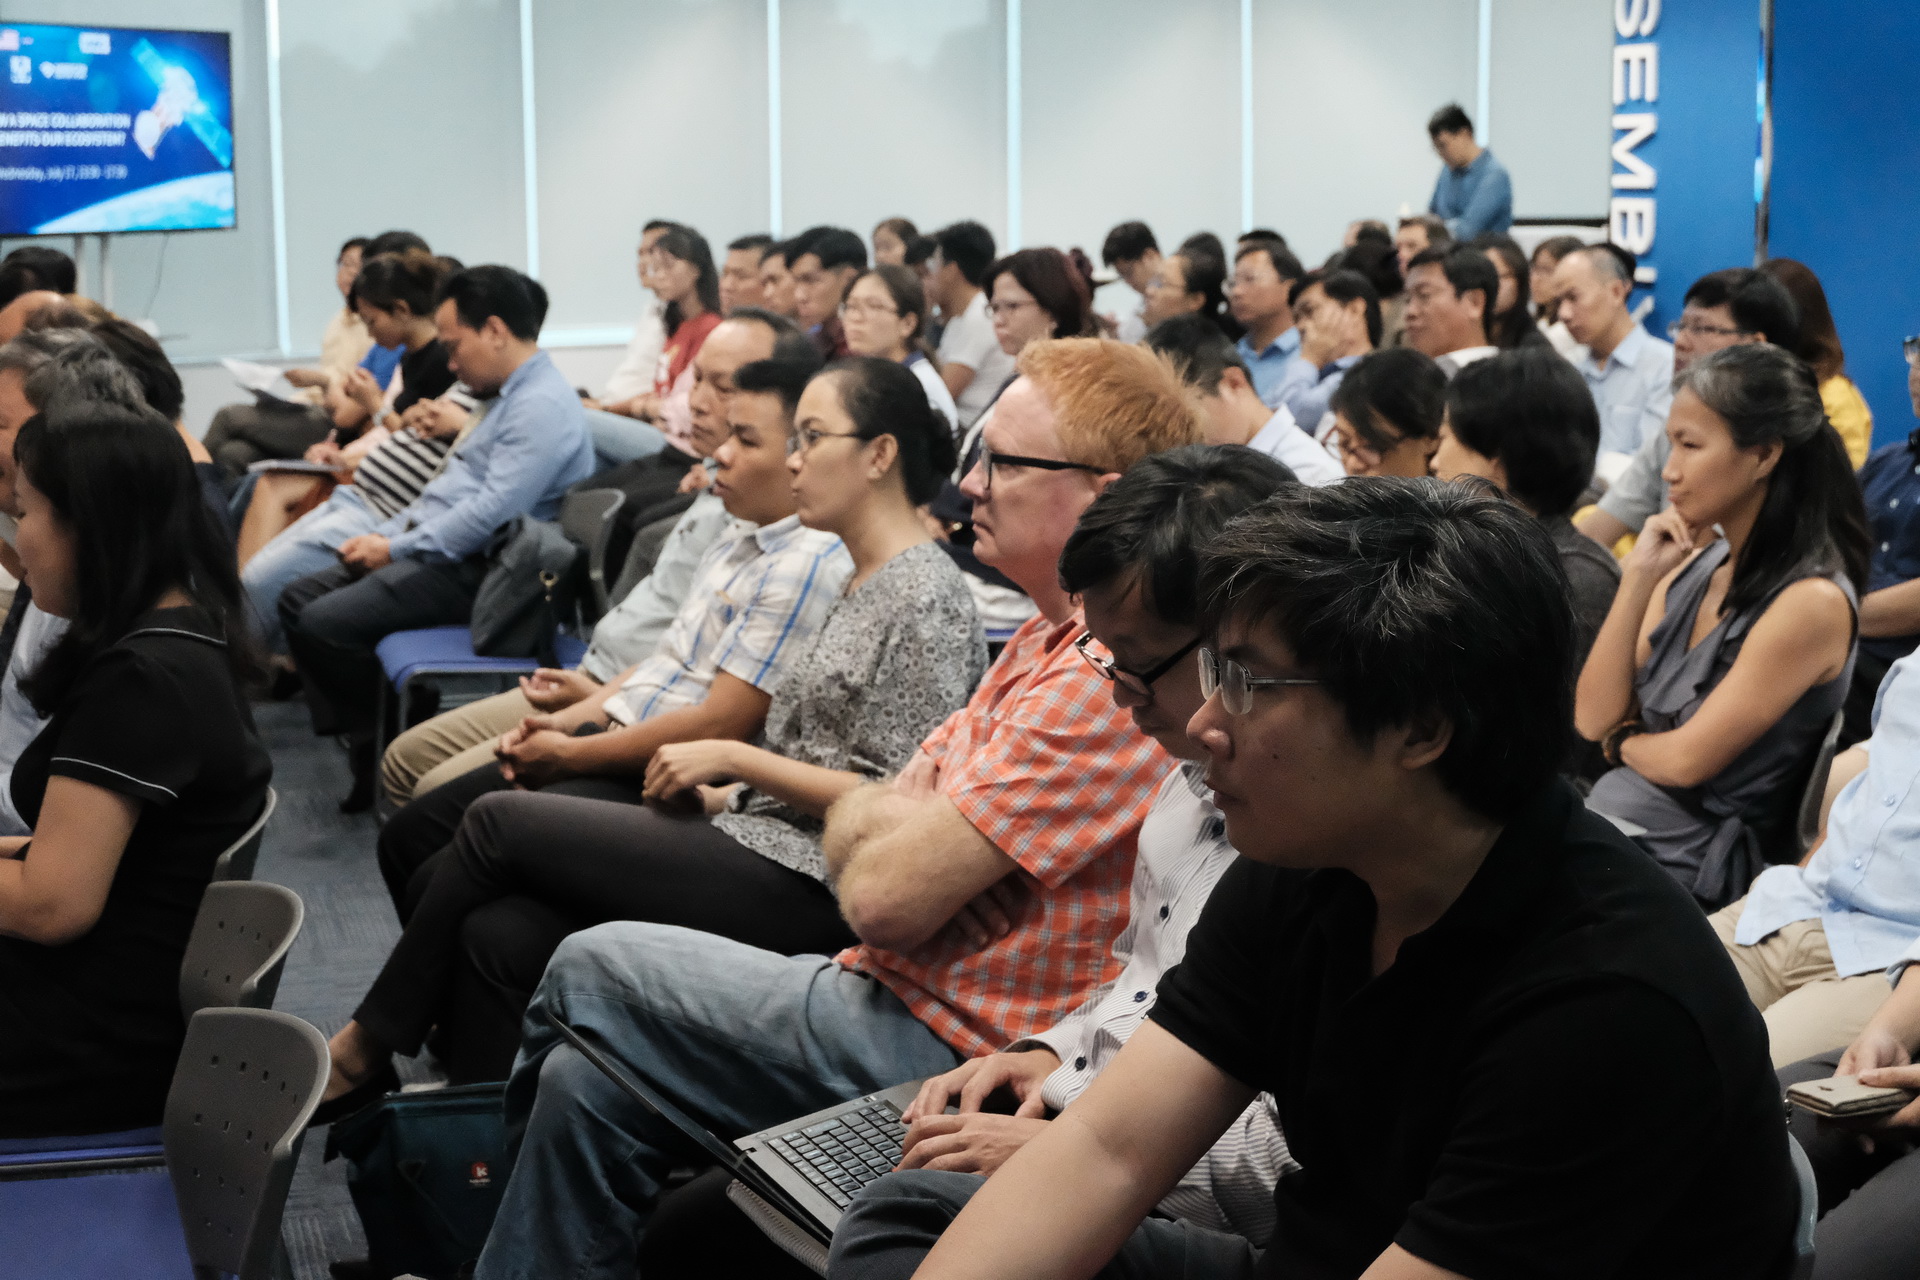 People attend a NASA-supported space collaboration event in Ho Chi Minh City on July 17, 2019. Photo: Tuan Son / Tuoi Tre News